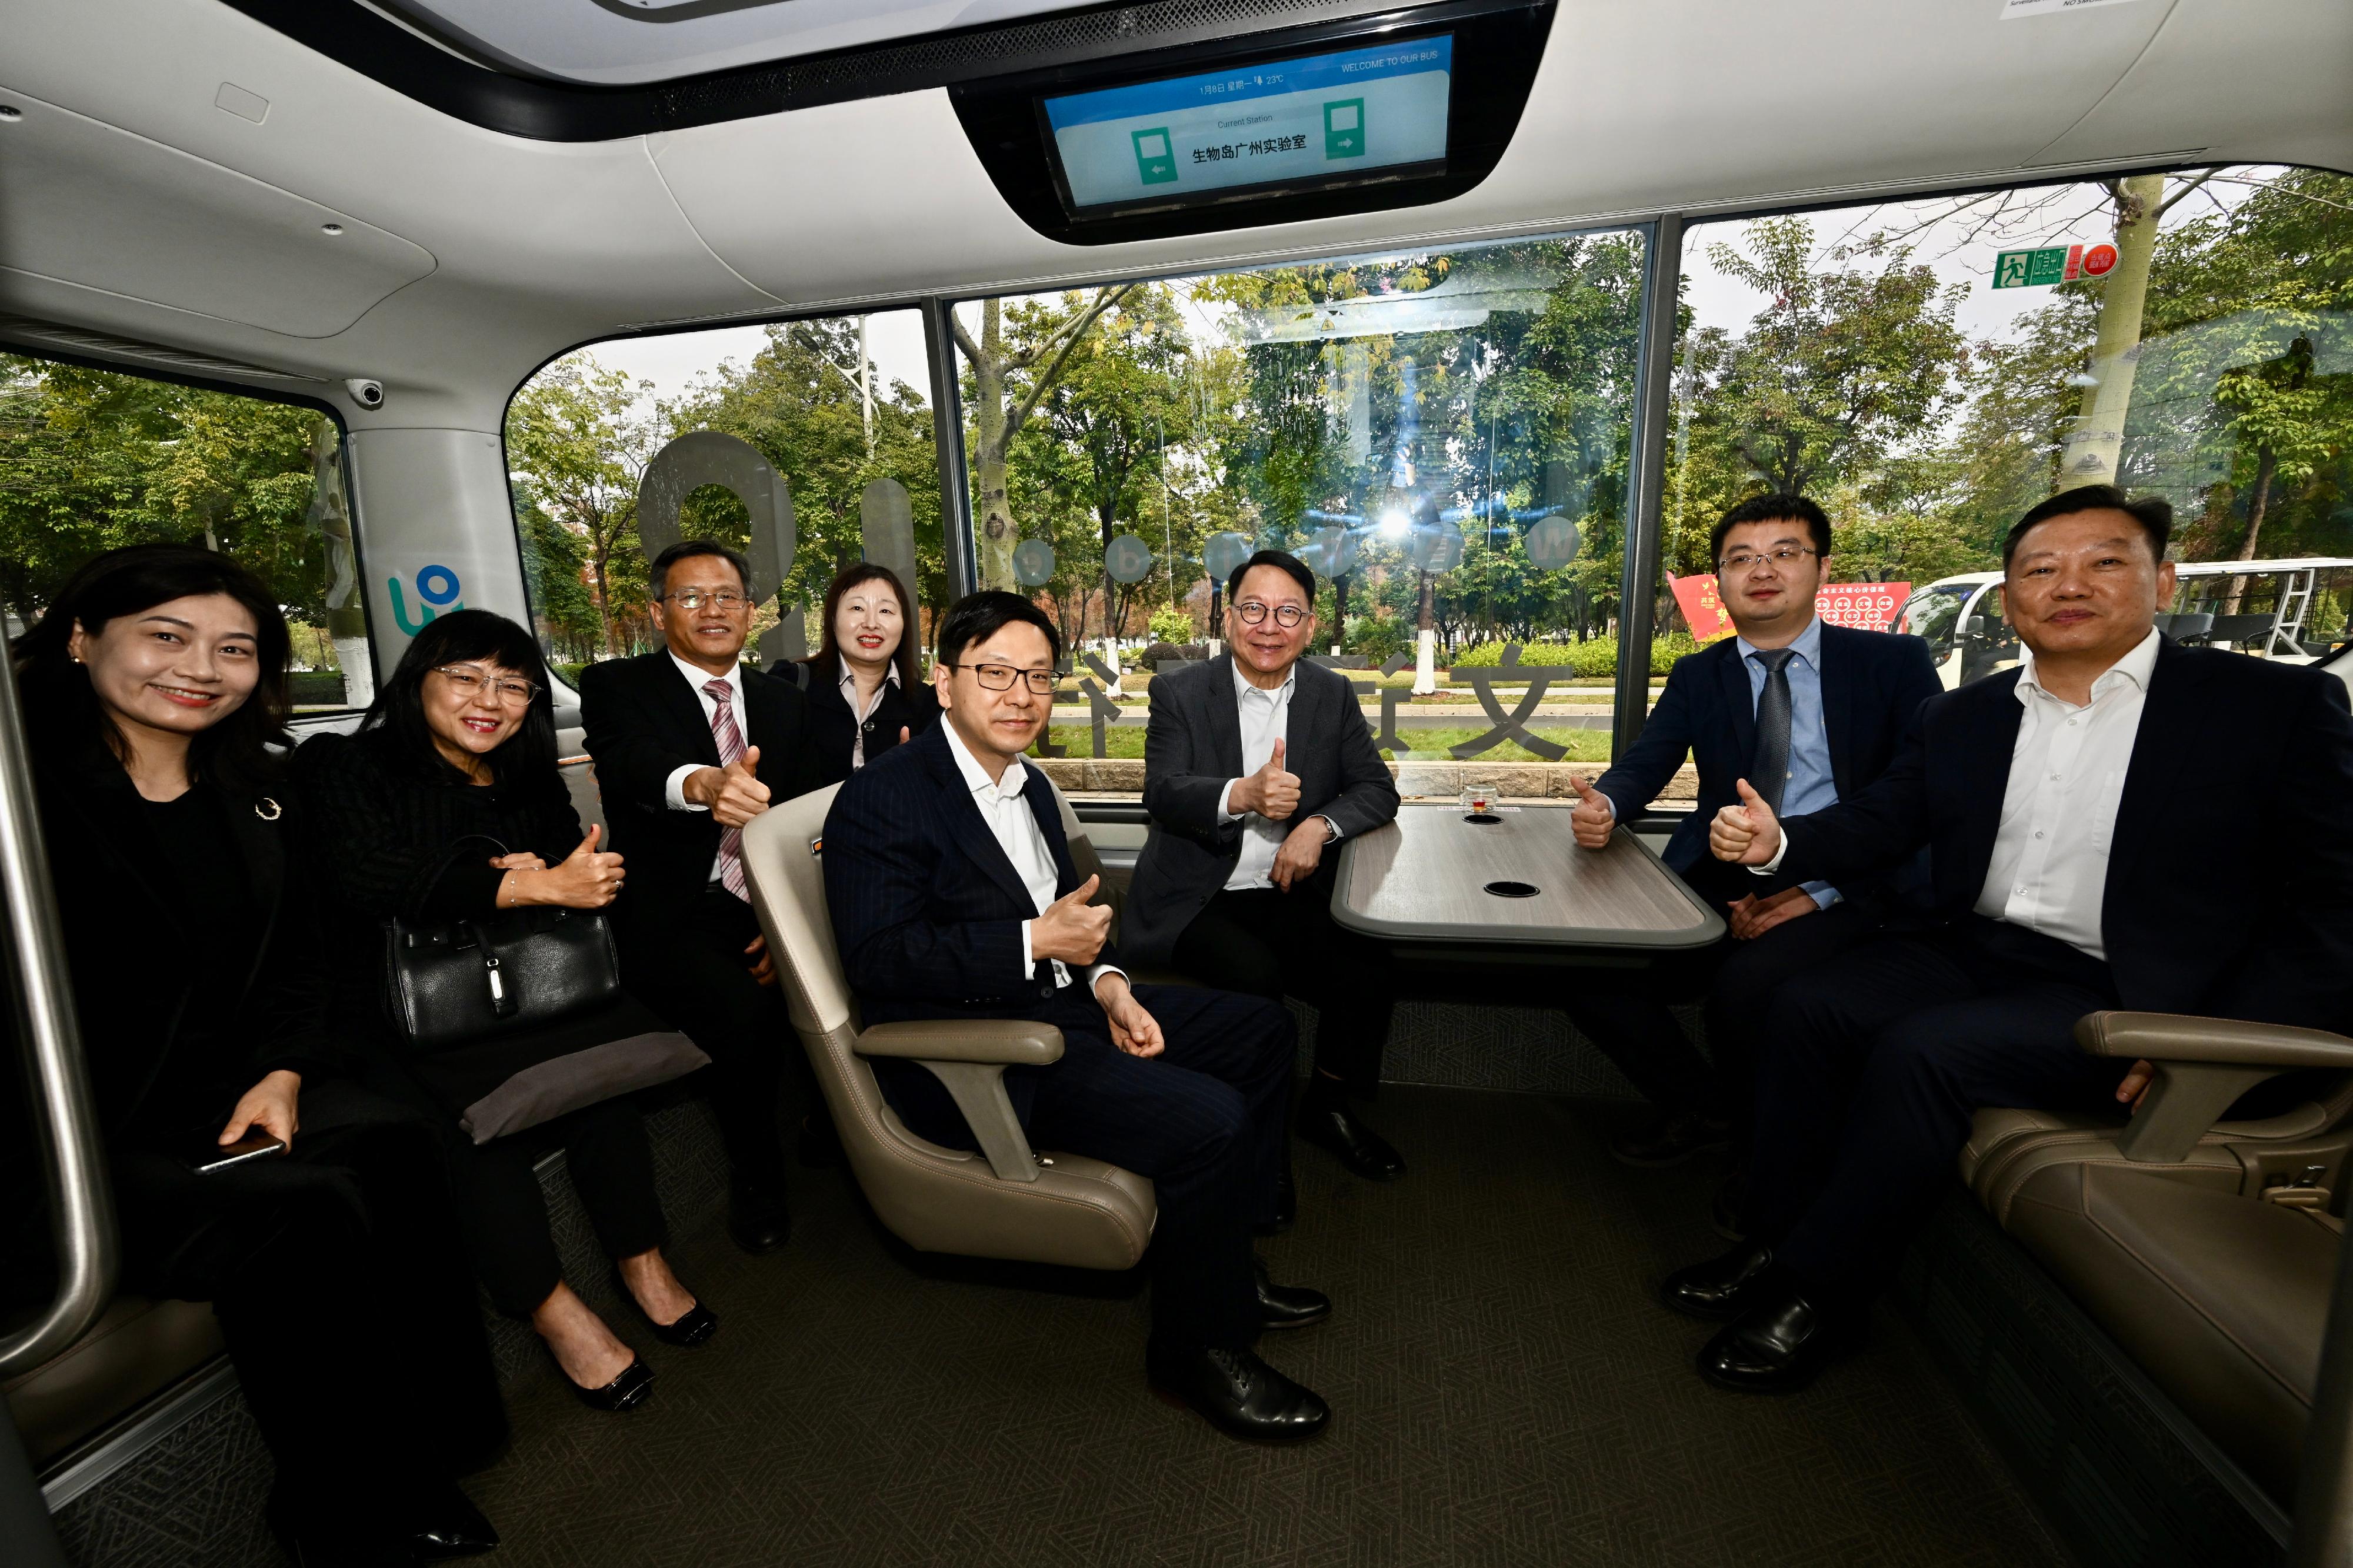 The Chief Secretary for Administration, Mr Chan Kwok-ki, arrived in Guangzhou today (January 8) to begin his visit to Mainland cities of the Guangdong-Hong Kong-Macao Greater Bay Area. Photo shows Mr Chan (third right) and the Secretary for Labour and Welfare, Mr Chris Sun (fourth right), taking an autonomous minibus on Guangzhou International Bio Island to the Guangzhou National Laboratory.